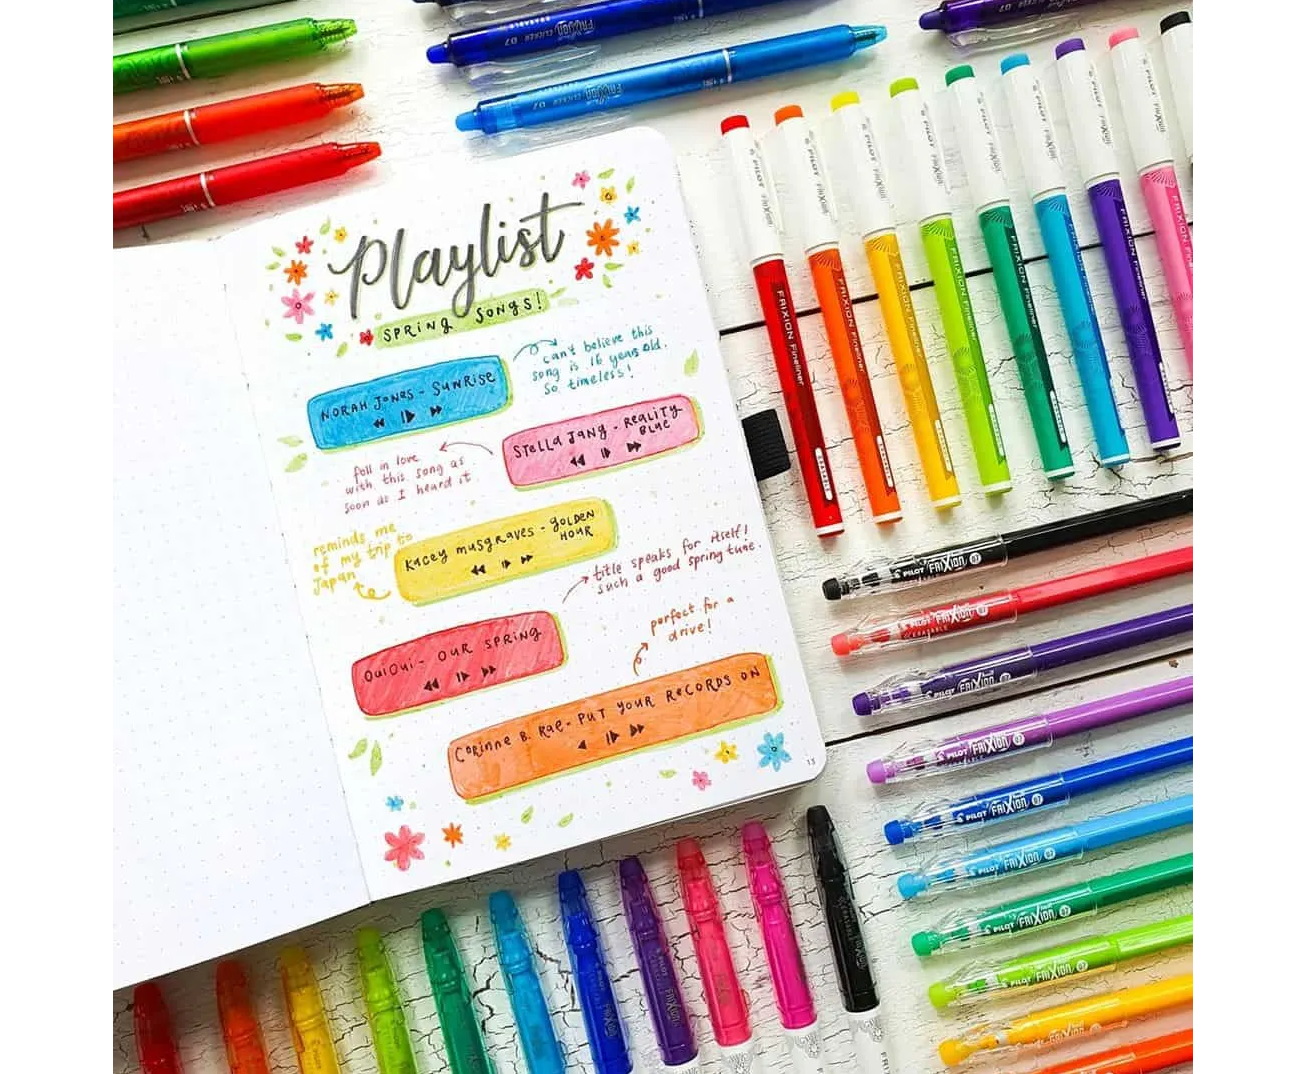 A colourful bullet journal spread by AmandaRachLee showing a playlist of spring songs. Surrounded by neatly placed coloured pens.